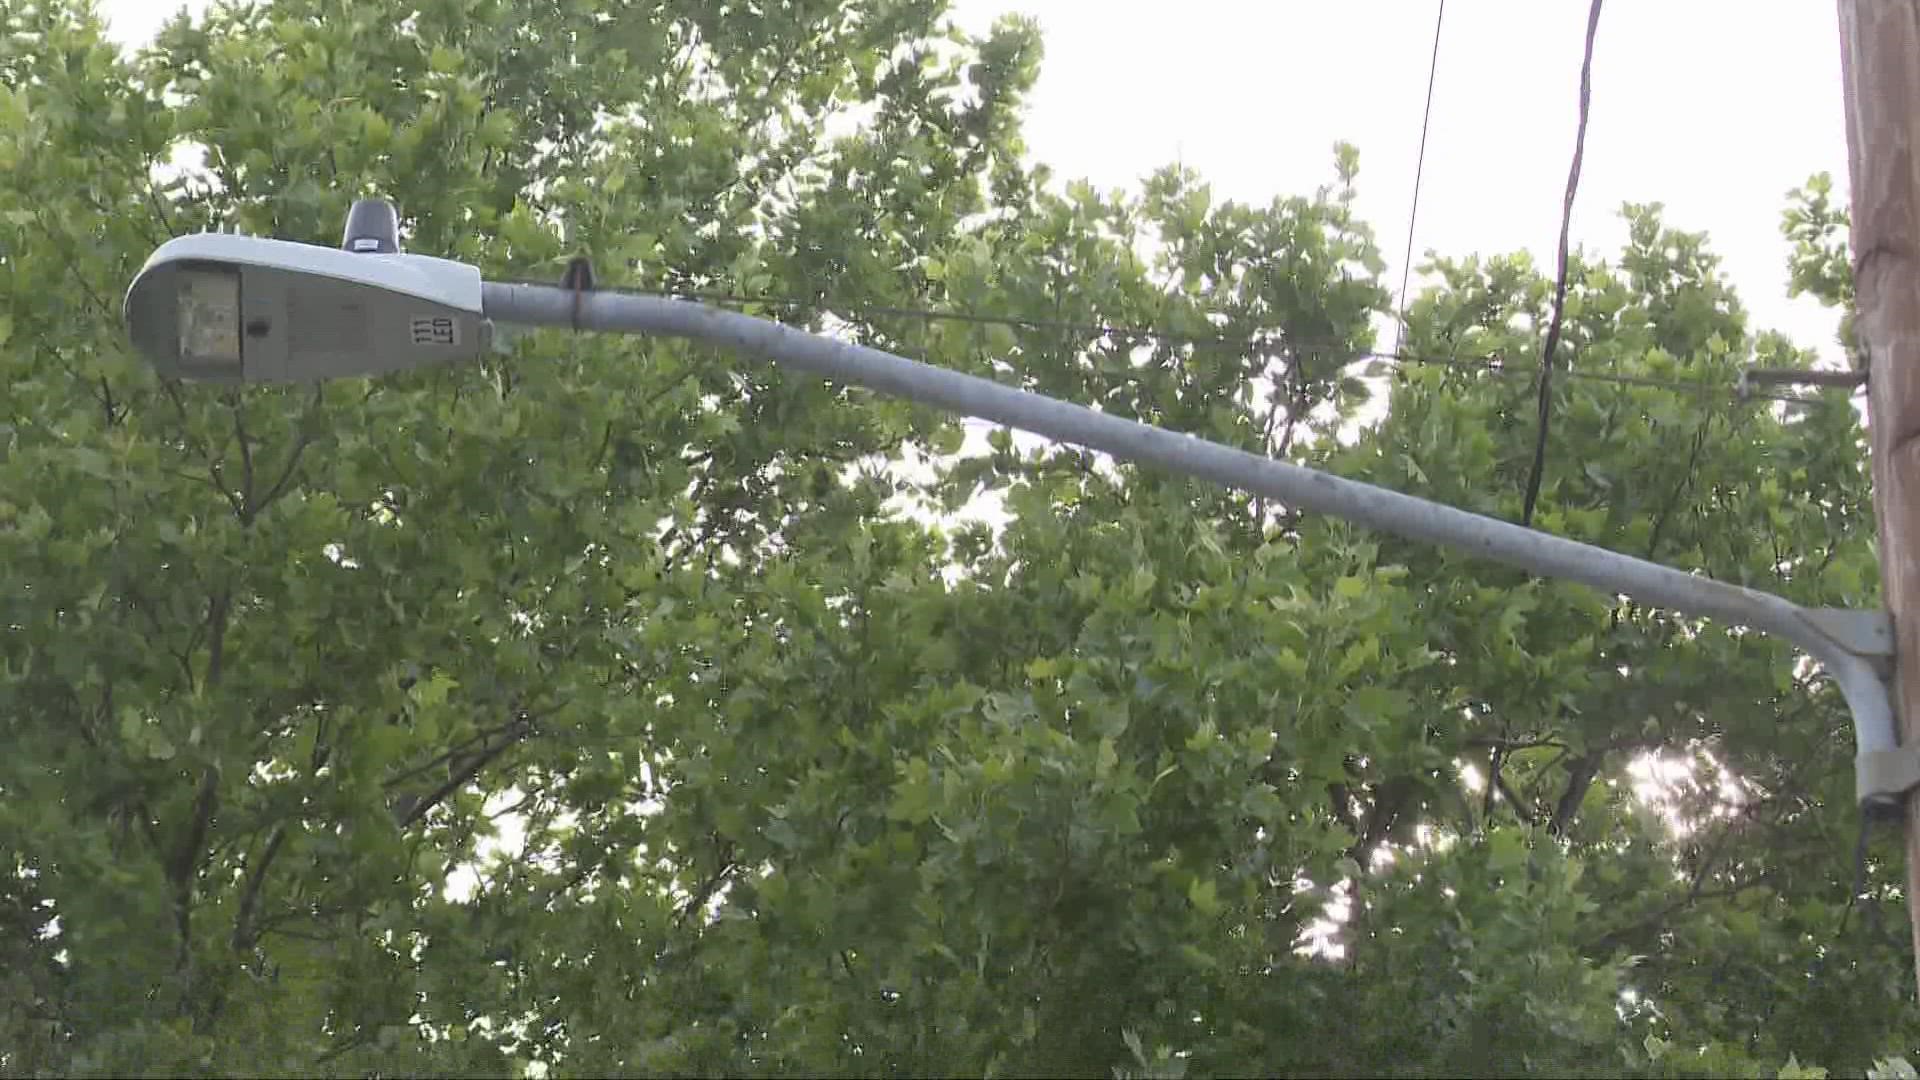 Downed trees from last week's severe storms is causing havoc to some Cleveland residents.